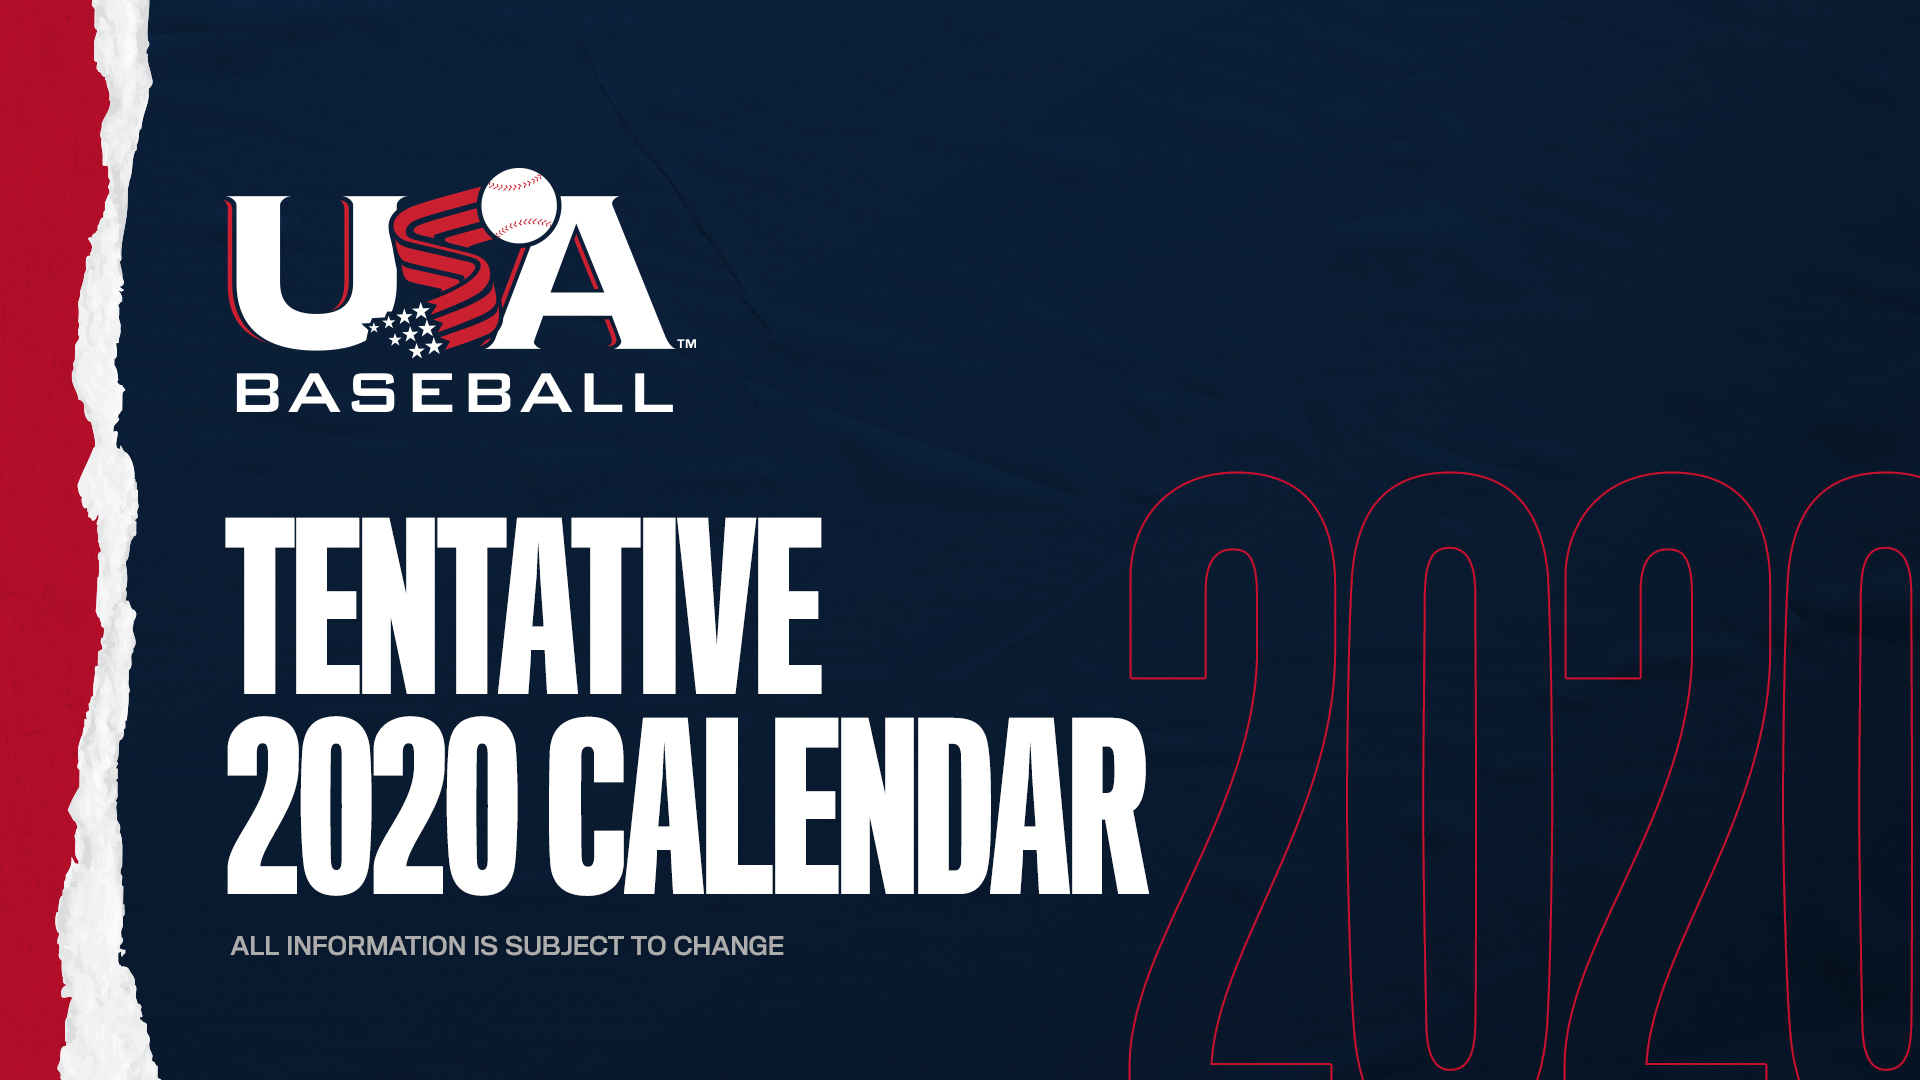 USA Baseball publishes revised schedule of events